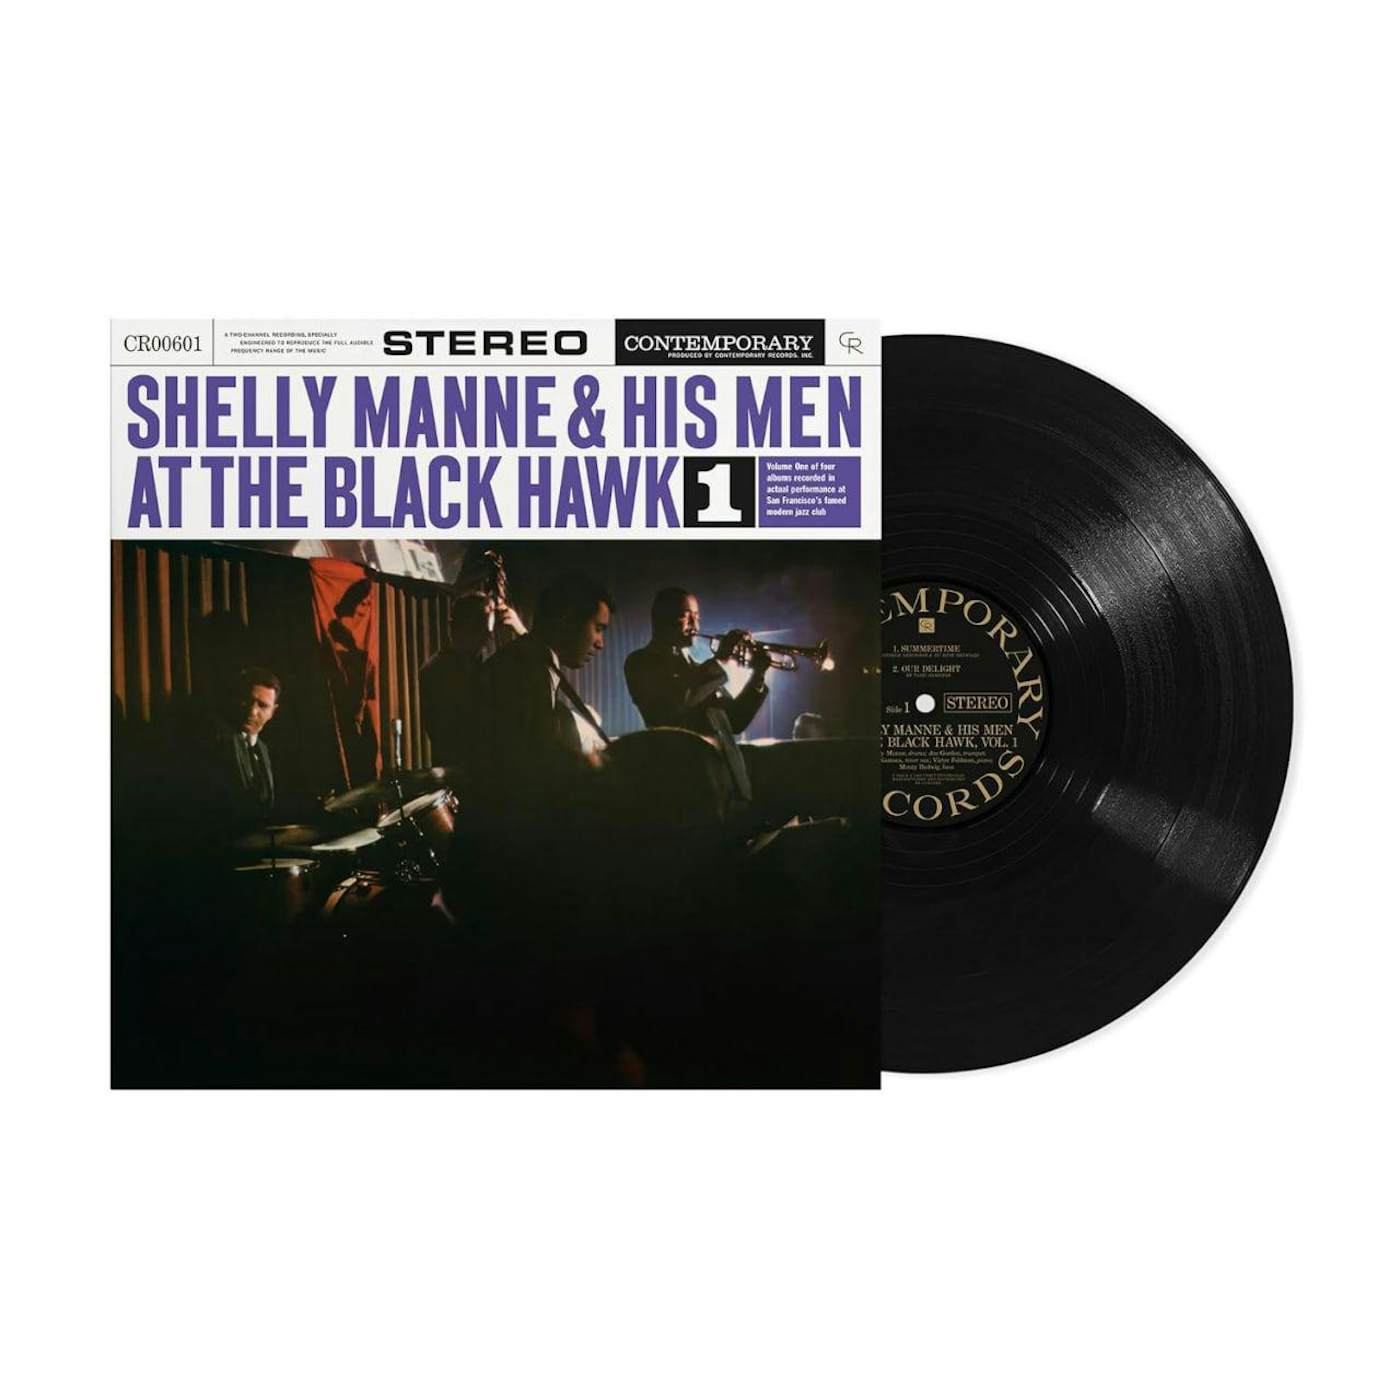 Shelly Manne & His Men AT THE BLACK HAWK, VOL. 1 (CONTEMPORARY RECORDS ACOUSTIC SOUNDS SERIES) Vinyl Record